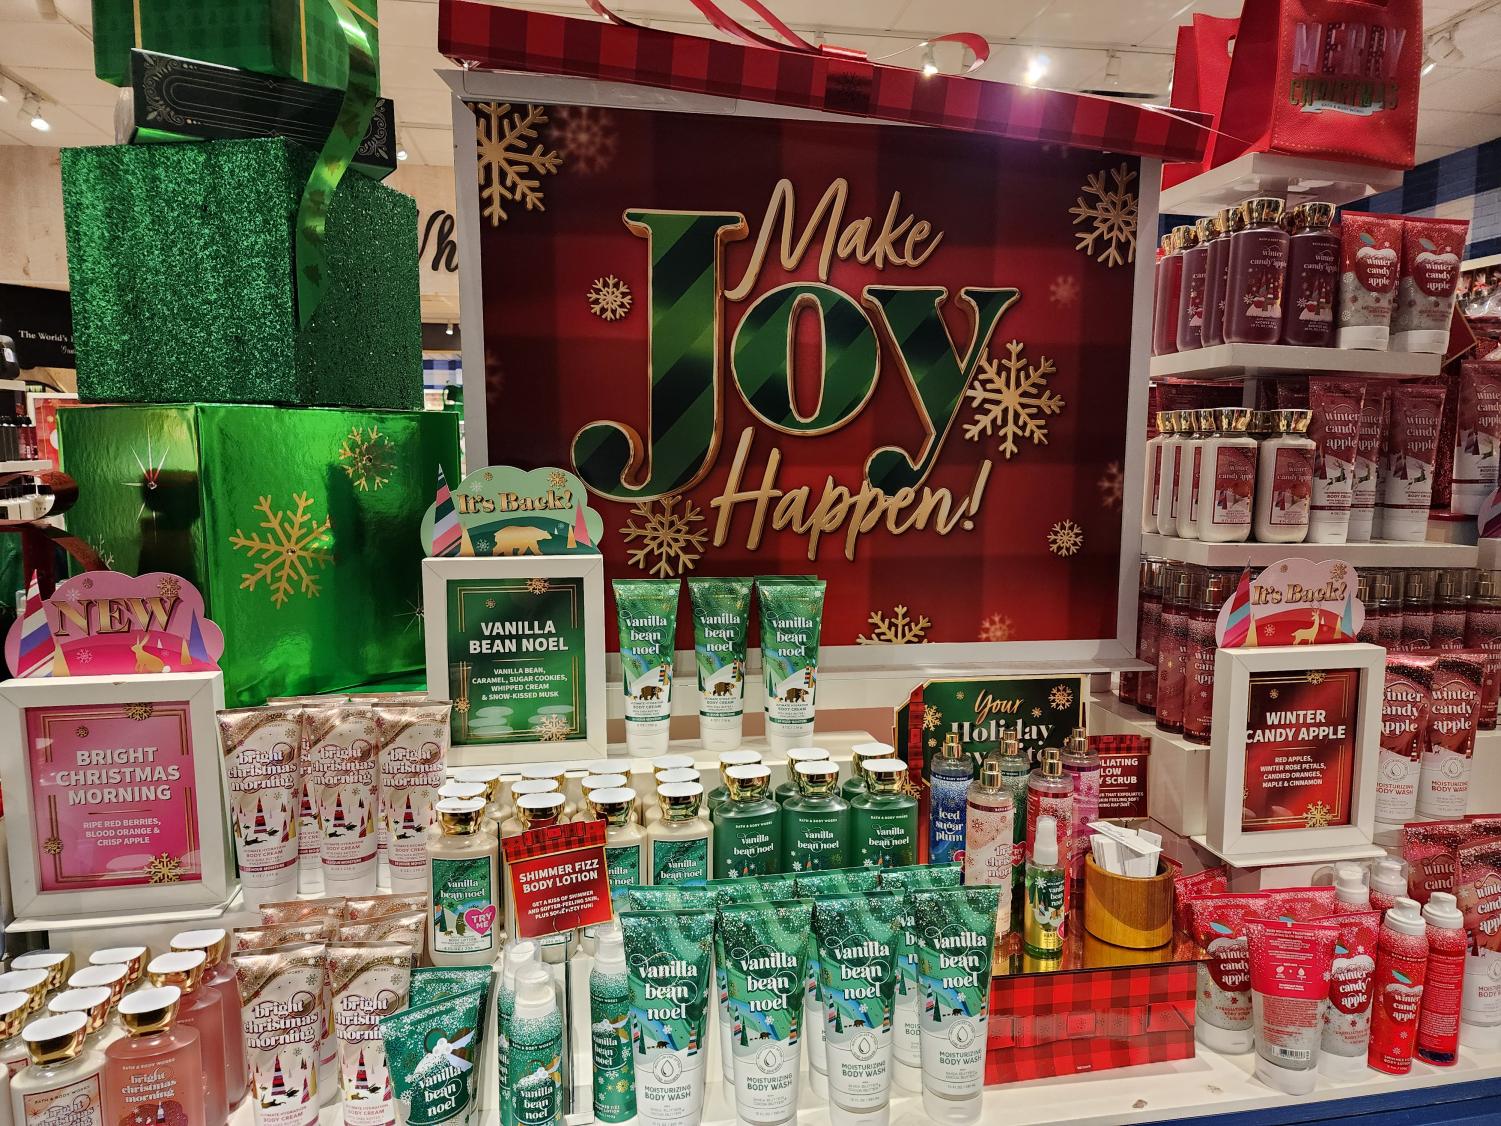 [Review] The Bath and Body Works Winter Collection offers some of the